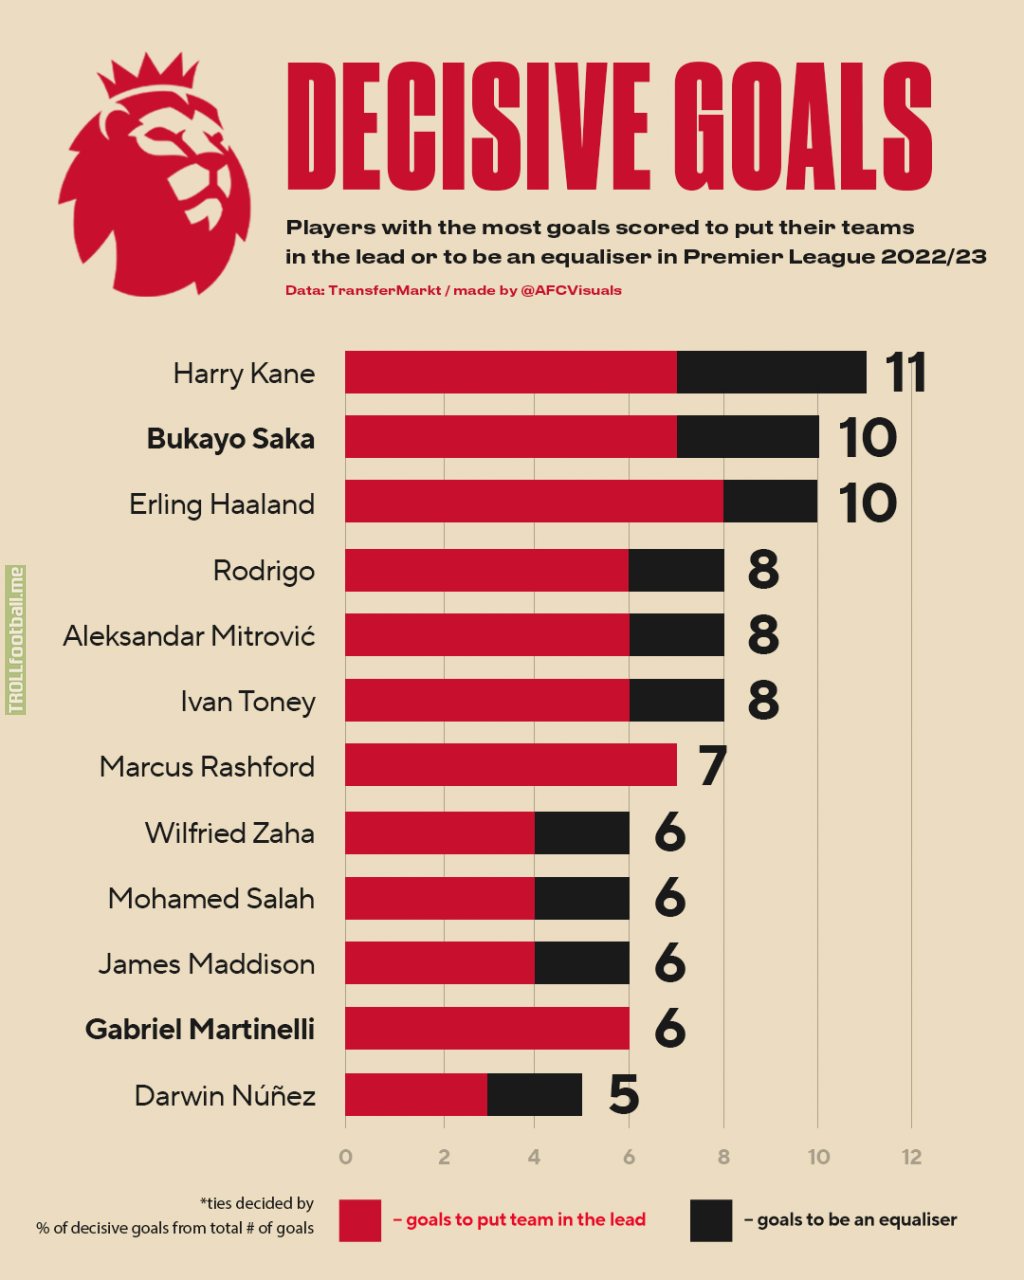 [@afcvisuals] Most goals scored to put their team in the lead or to be an equaliser in the 22/23 PL season.